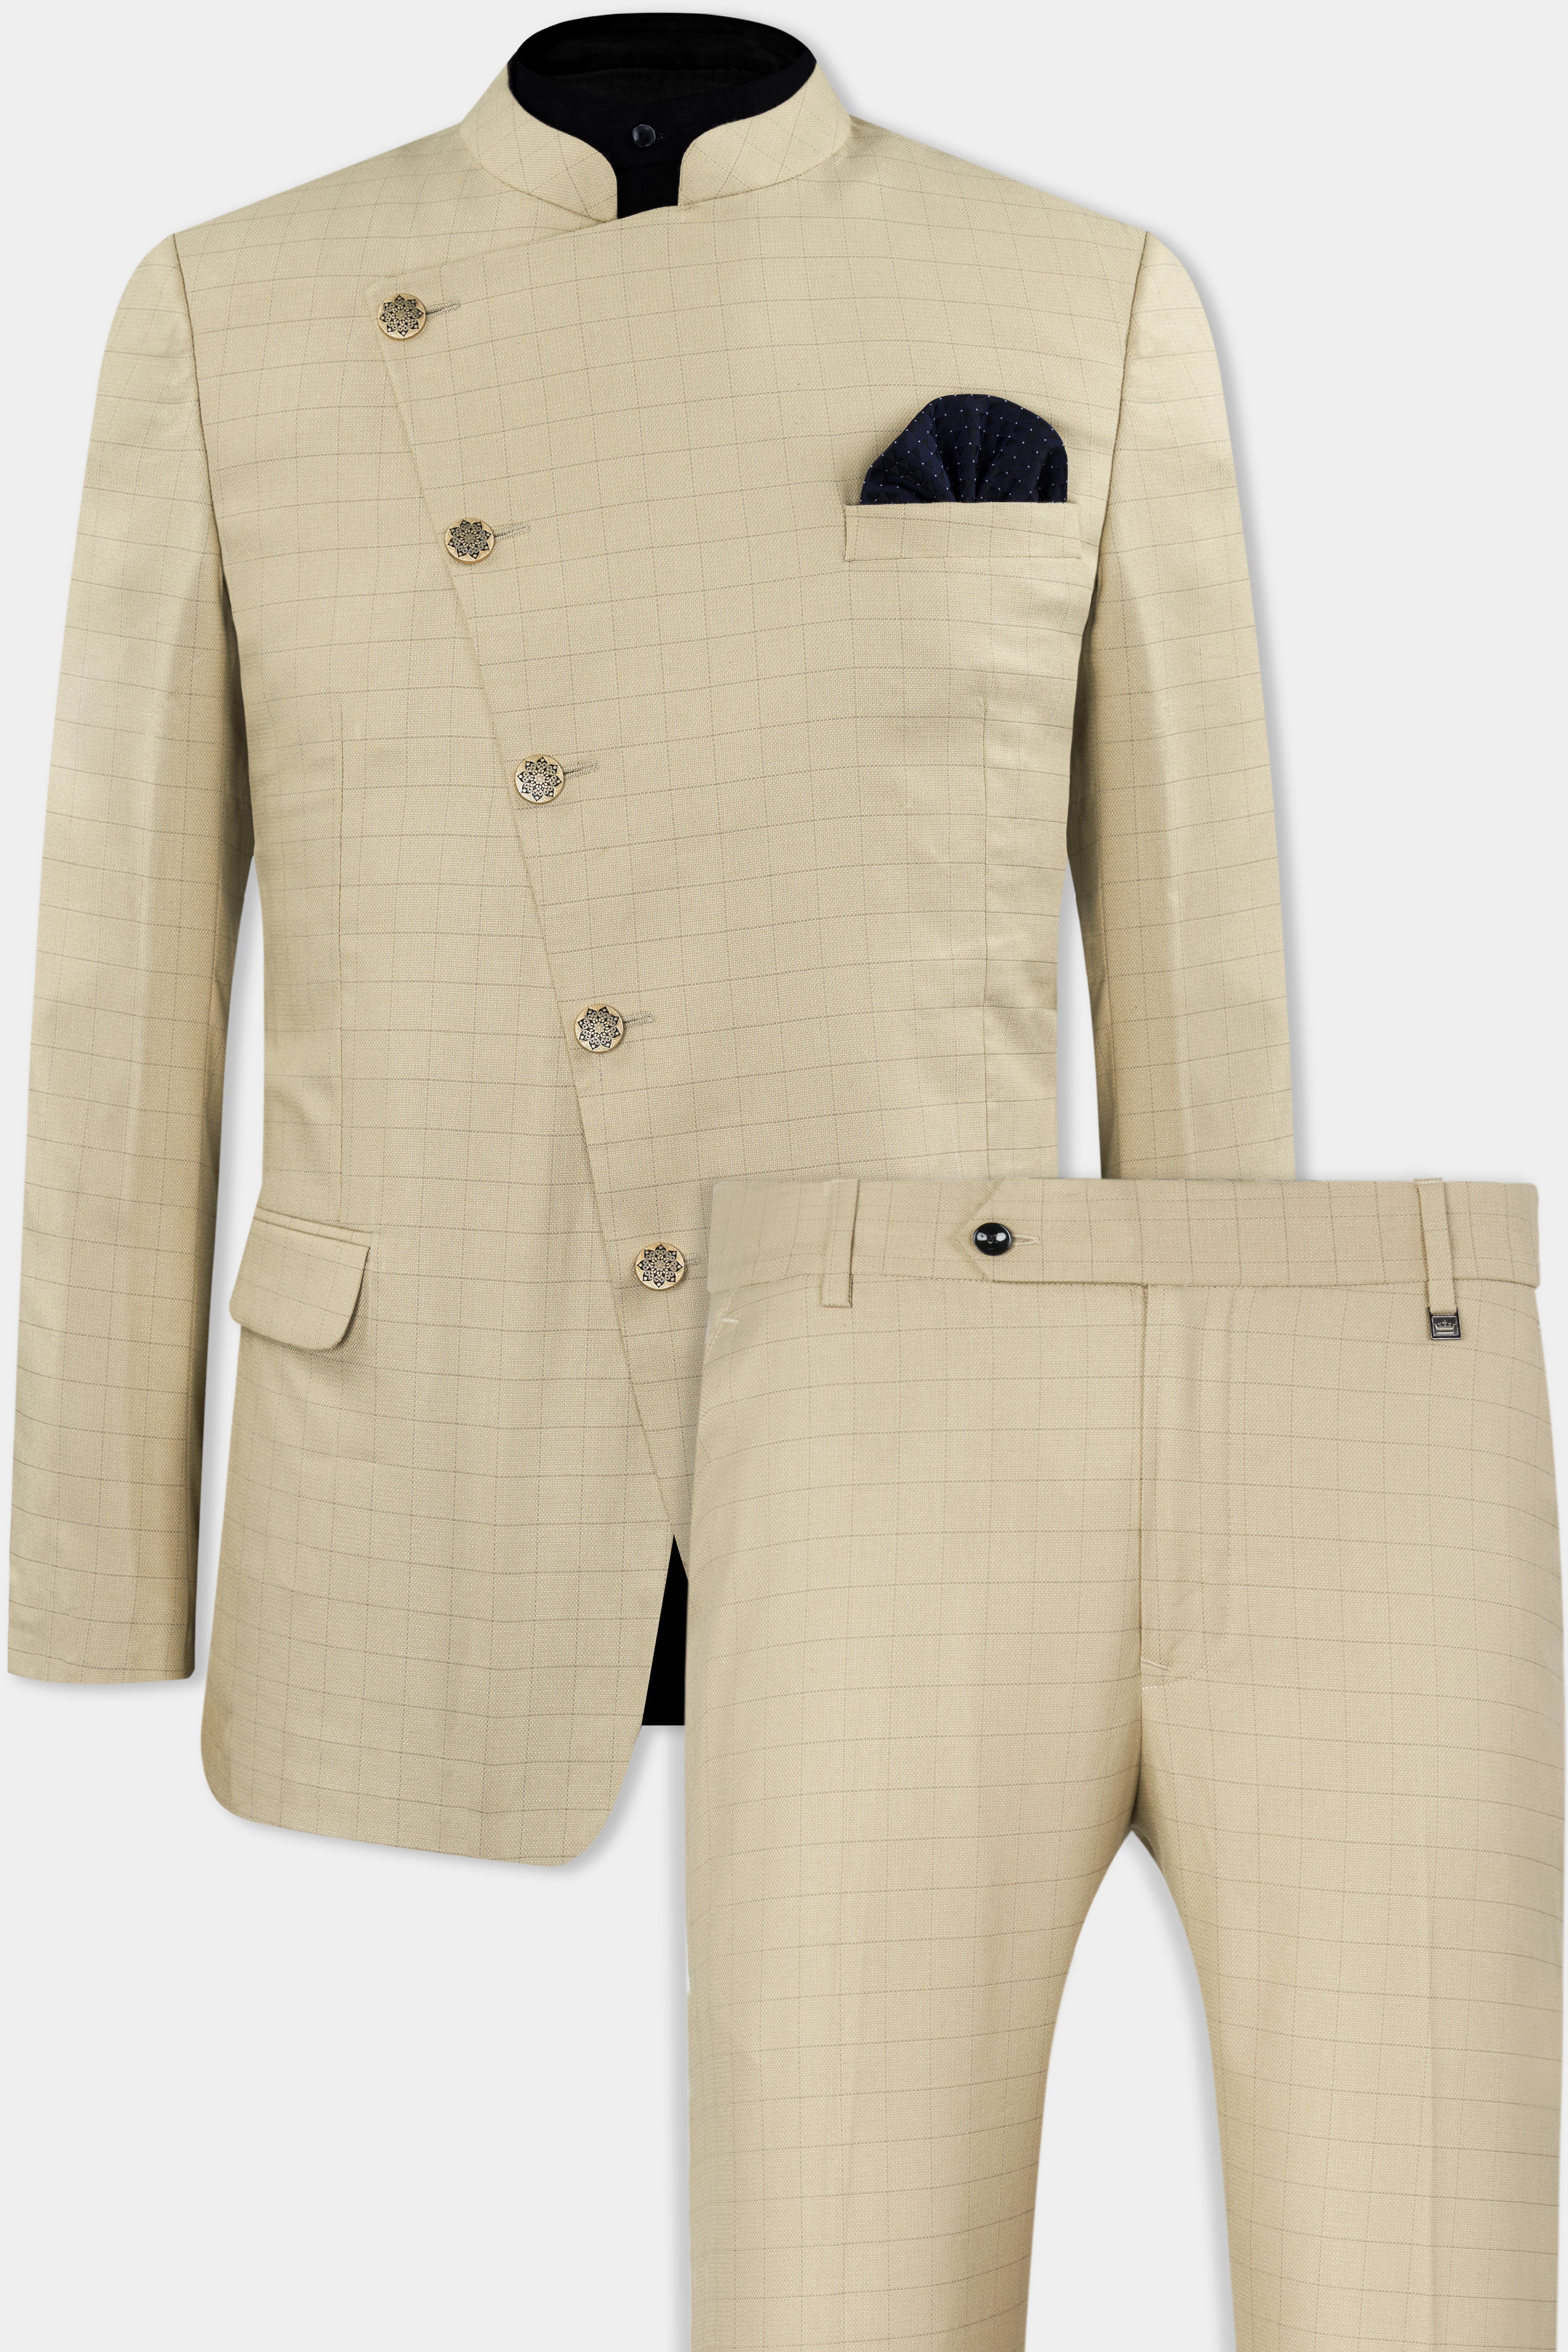 Pavlova Brown with Taupe Brown Checkered Dobby Wool Rich Cross Buttoned Bandhgala Suit ST2878-CBG-36, ST2878-CBG-38, ST2878-CBG-40, ST2878-CBG-42, ST2878-CBG-44, ST2878-CBG-46, ST2878-CBG-48, ST2878-CBG-50, ST2878-CBG-52, ST2878-CBG-54, ST2878-CBG-56, ST2878-CBG-58, ST2878-CBG-60